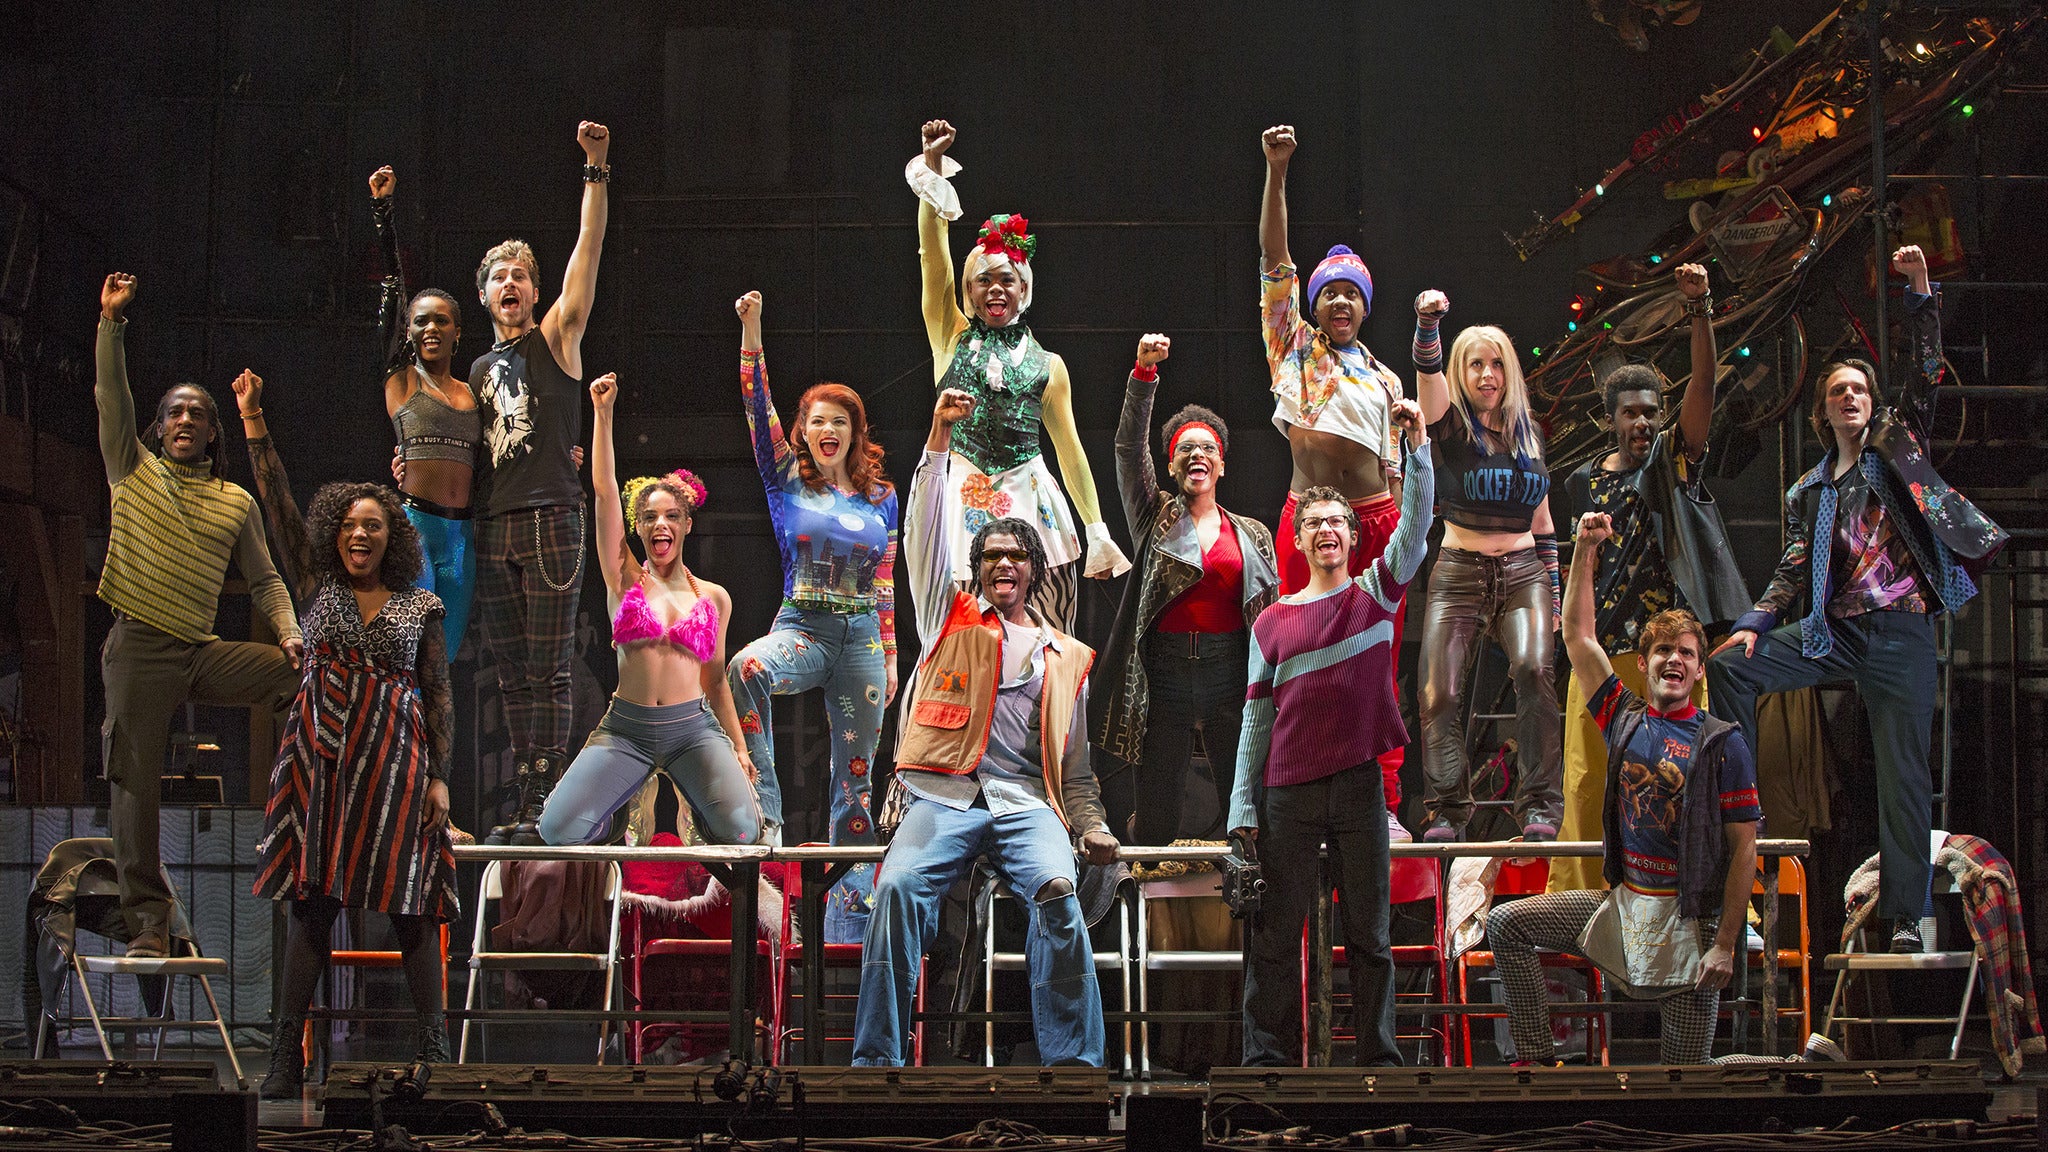 Rent (Touring) in Little Rock promo photo for Celebrity Attractions' presale offer code